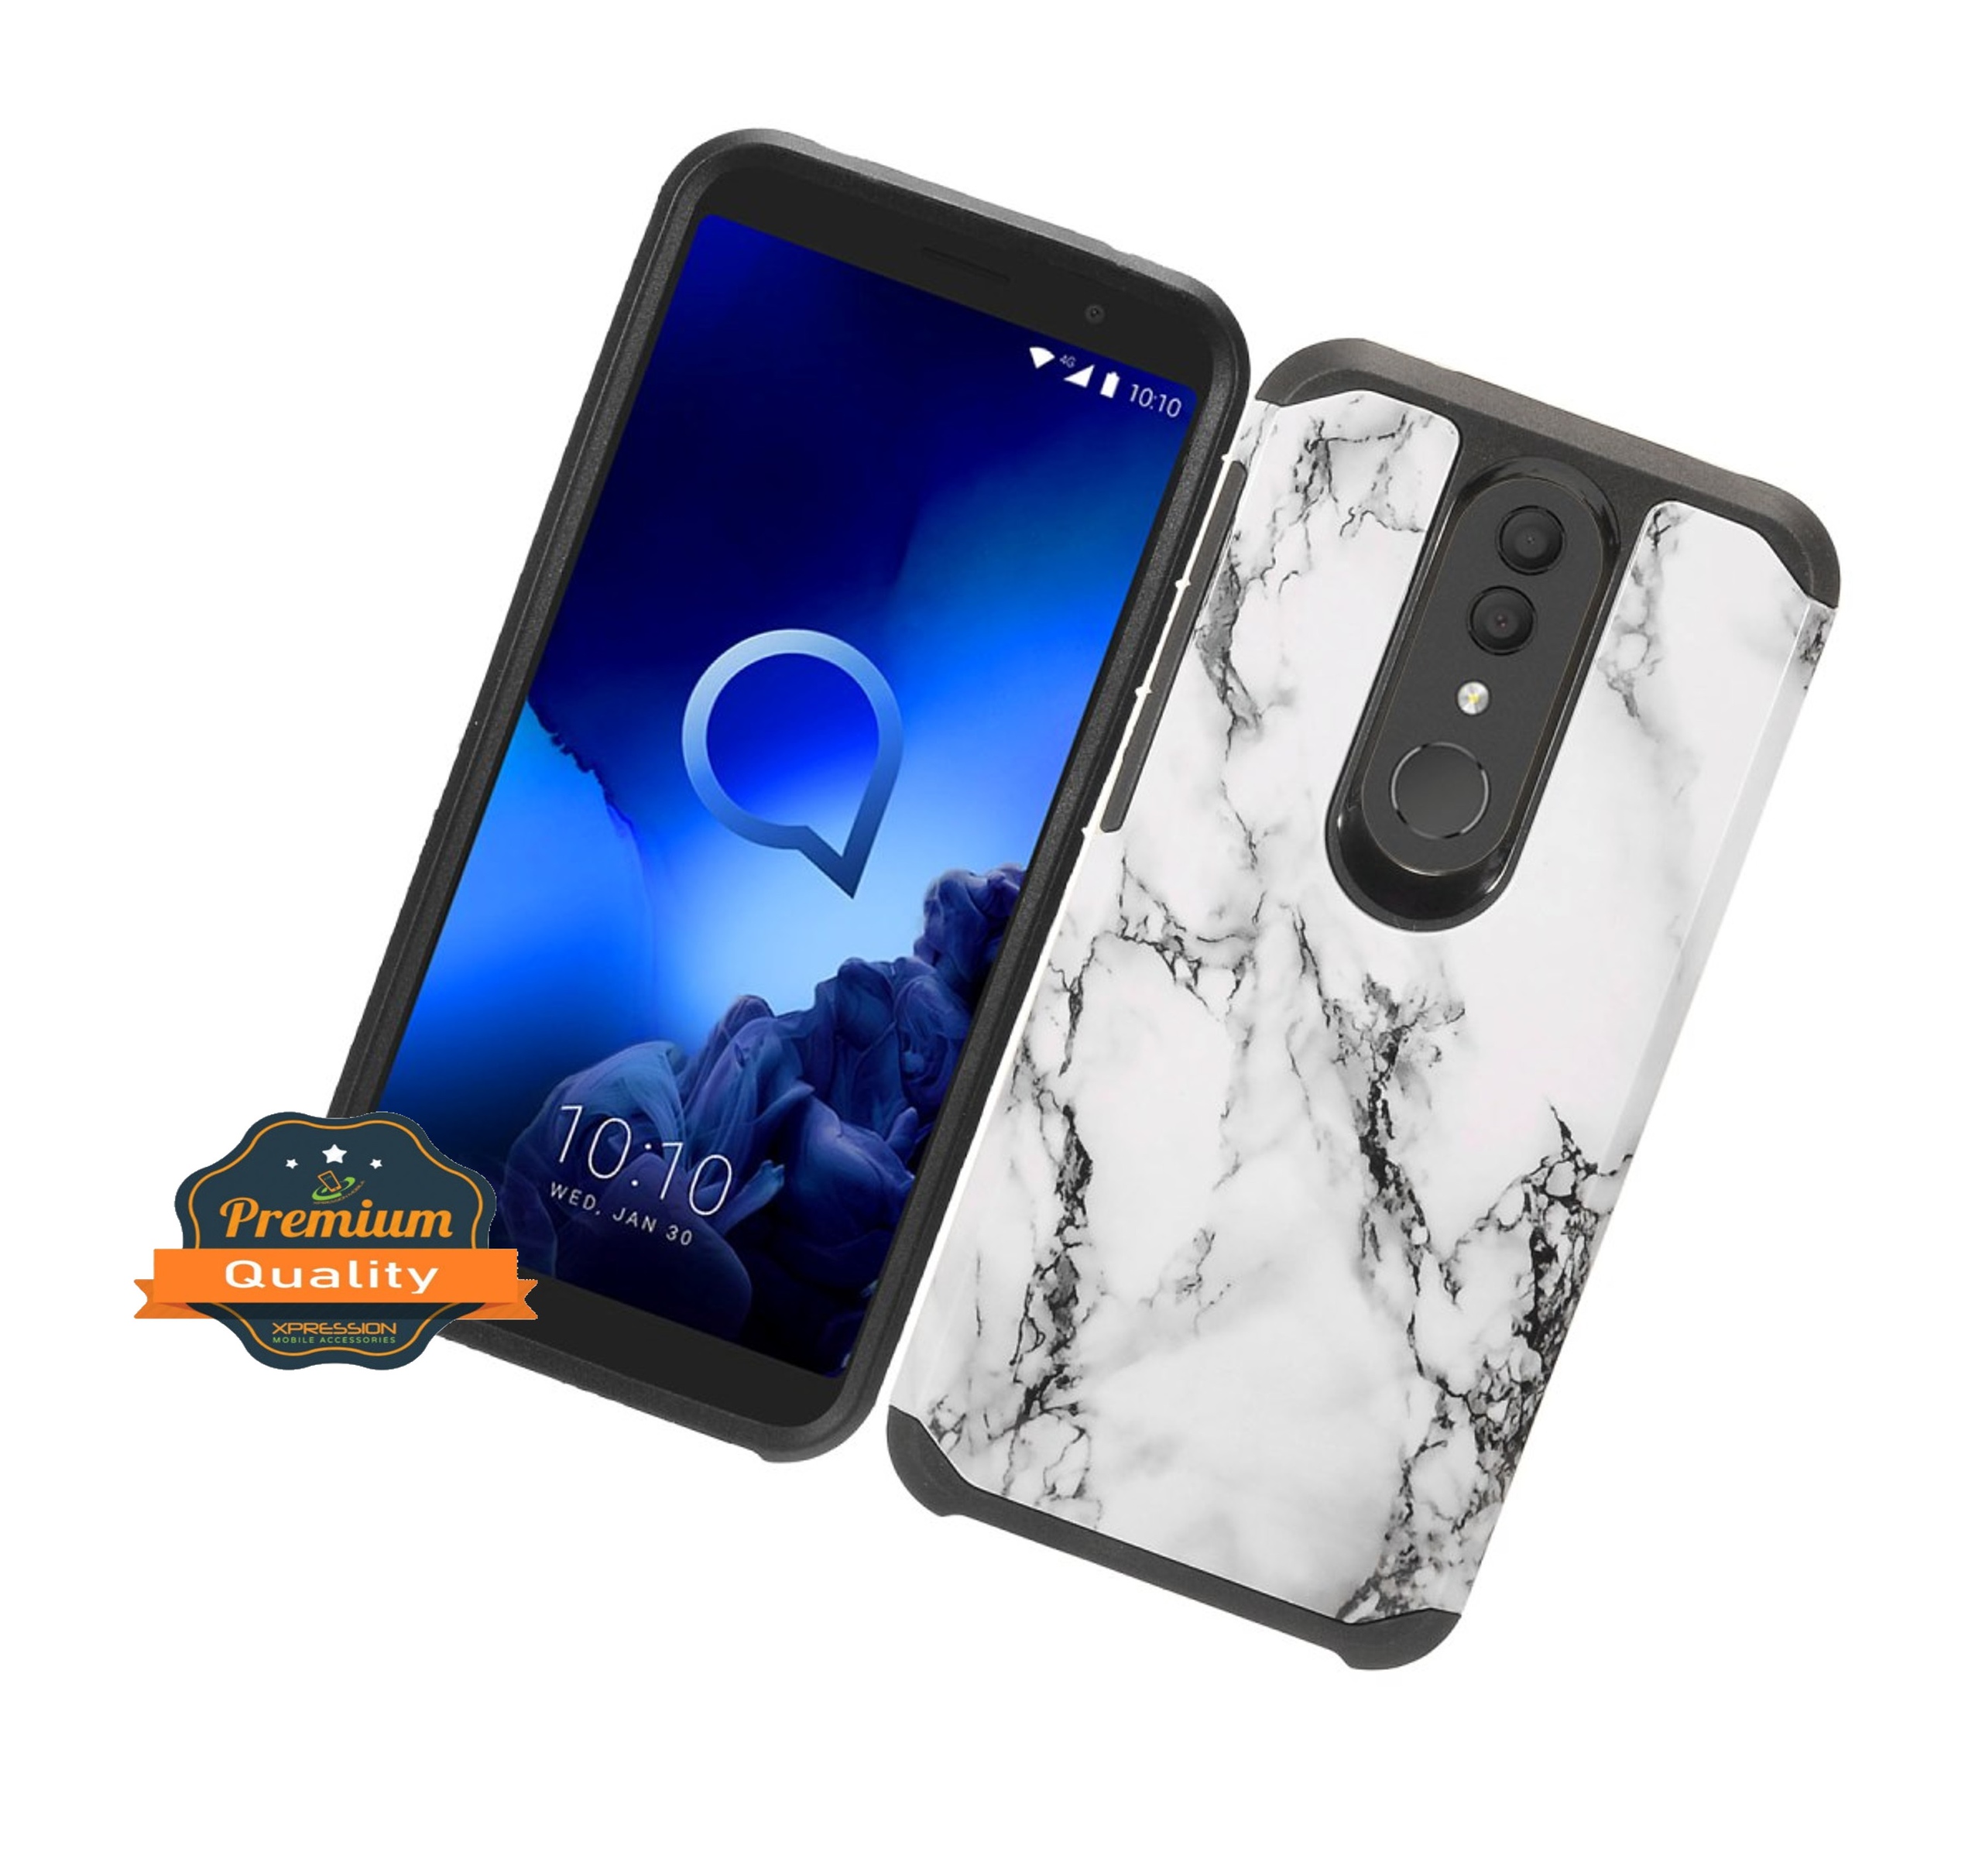 Case for Samsung Galaxy A32 5G Stylish Design Floral Armor Dual Layer Hard Shockproof TPU Hybrid Protection Slim Cover for Galaxy A32 5G by Xcell - Marble White - image 5 of 9